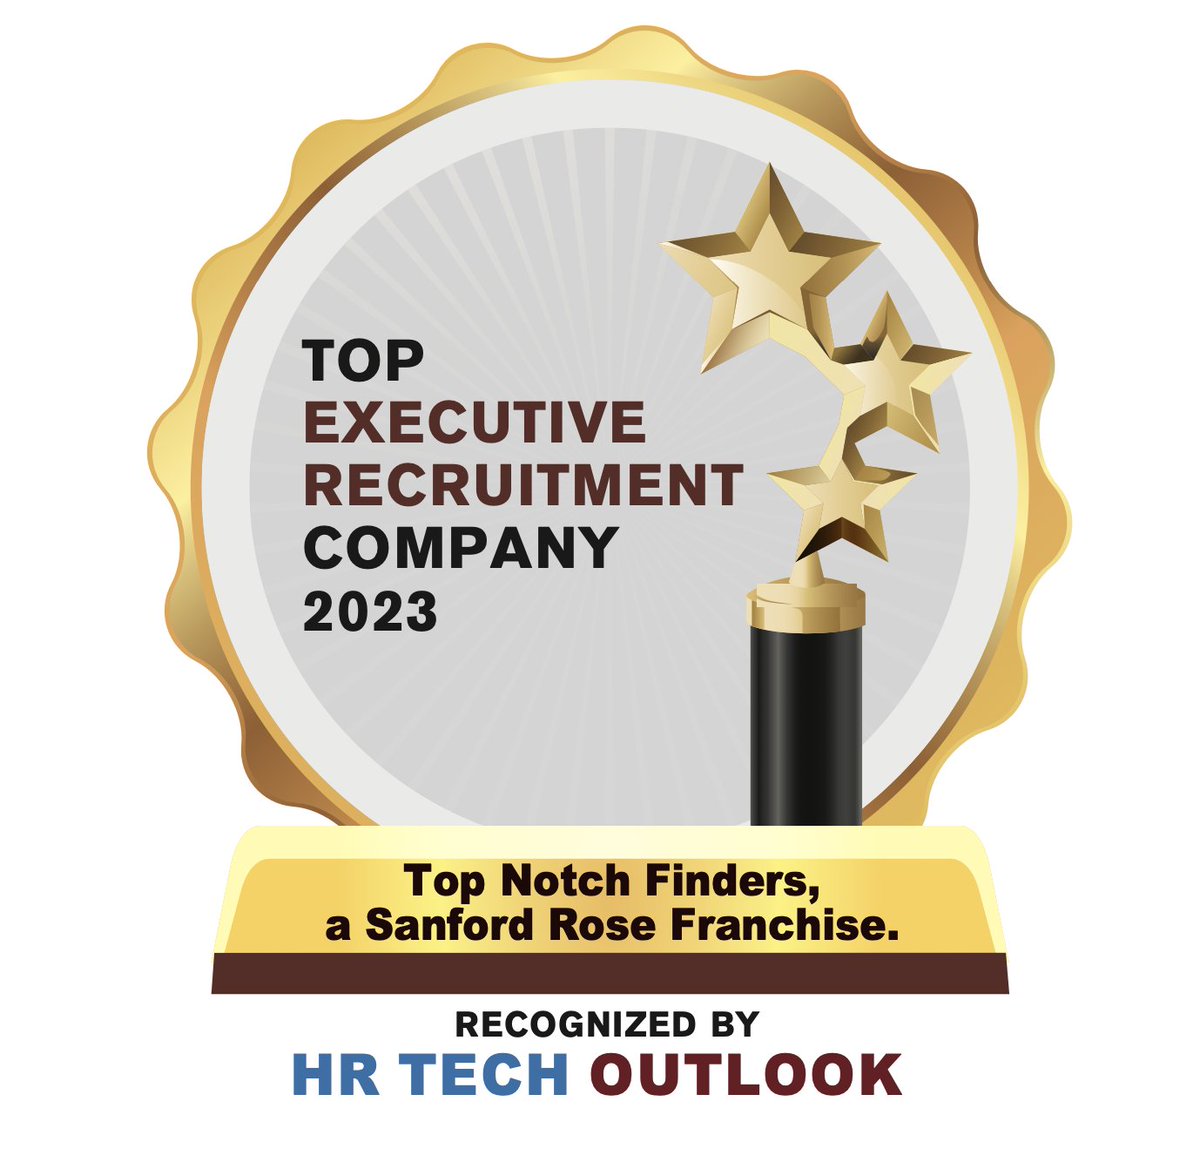 🌟 **We are thrilled to announce that we have been named 'Company of the Year 2023' in North America in Executive & Professional Search by HR Tech Outlook!** 🌟

Thank you once again for being a part of our journey.

#CompanyOfTheYear #ExecutiveSearch #HRIndustryExperts